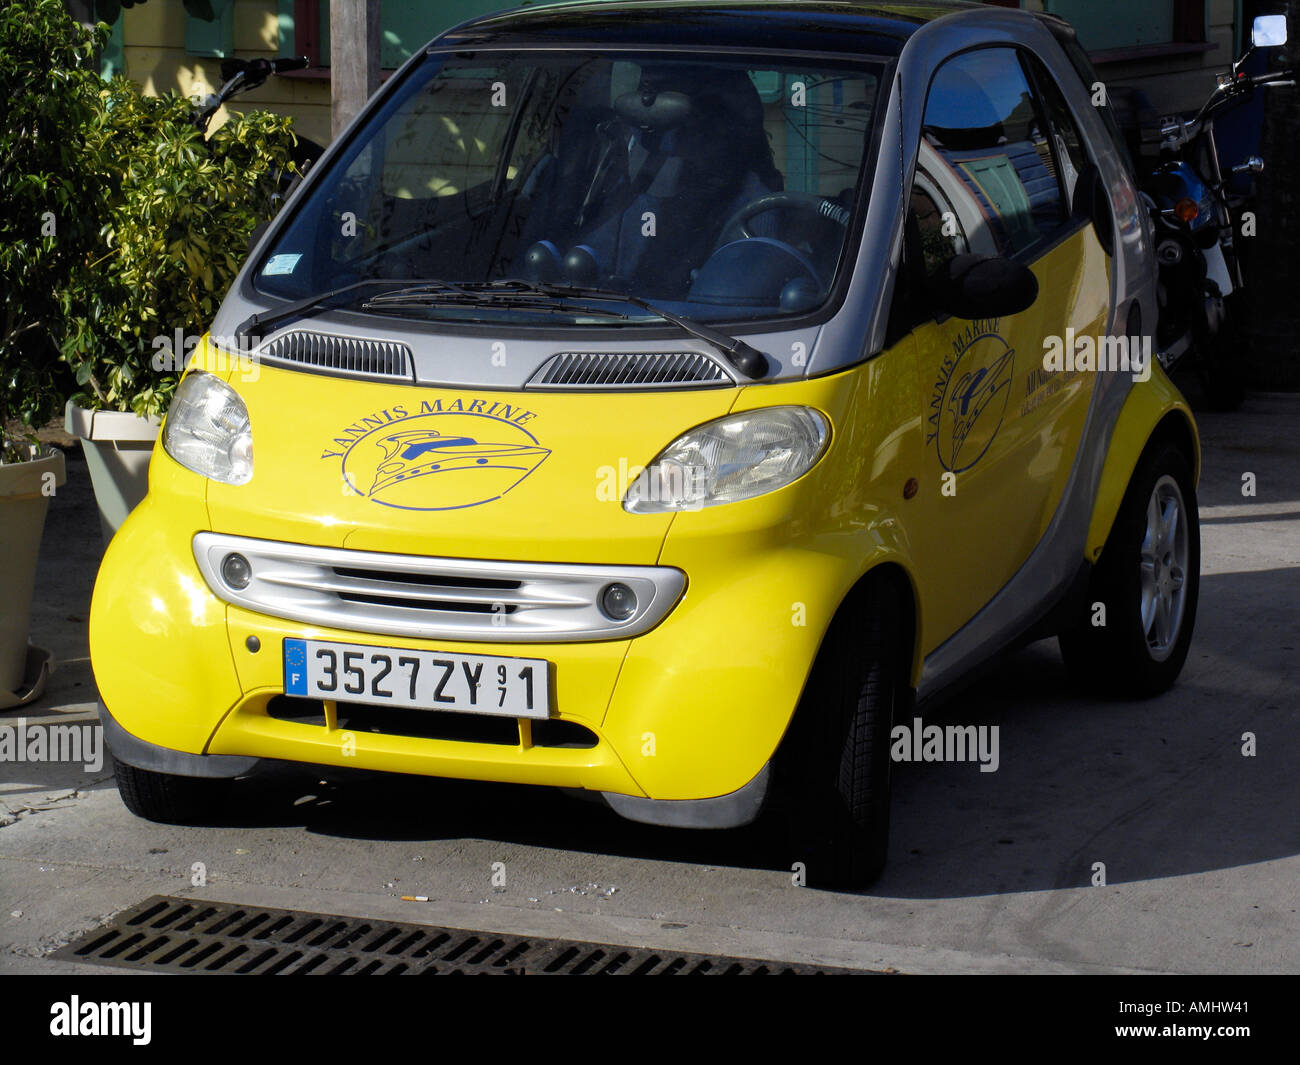 Smart Cars are popular on island of St Barts Stock Photo